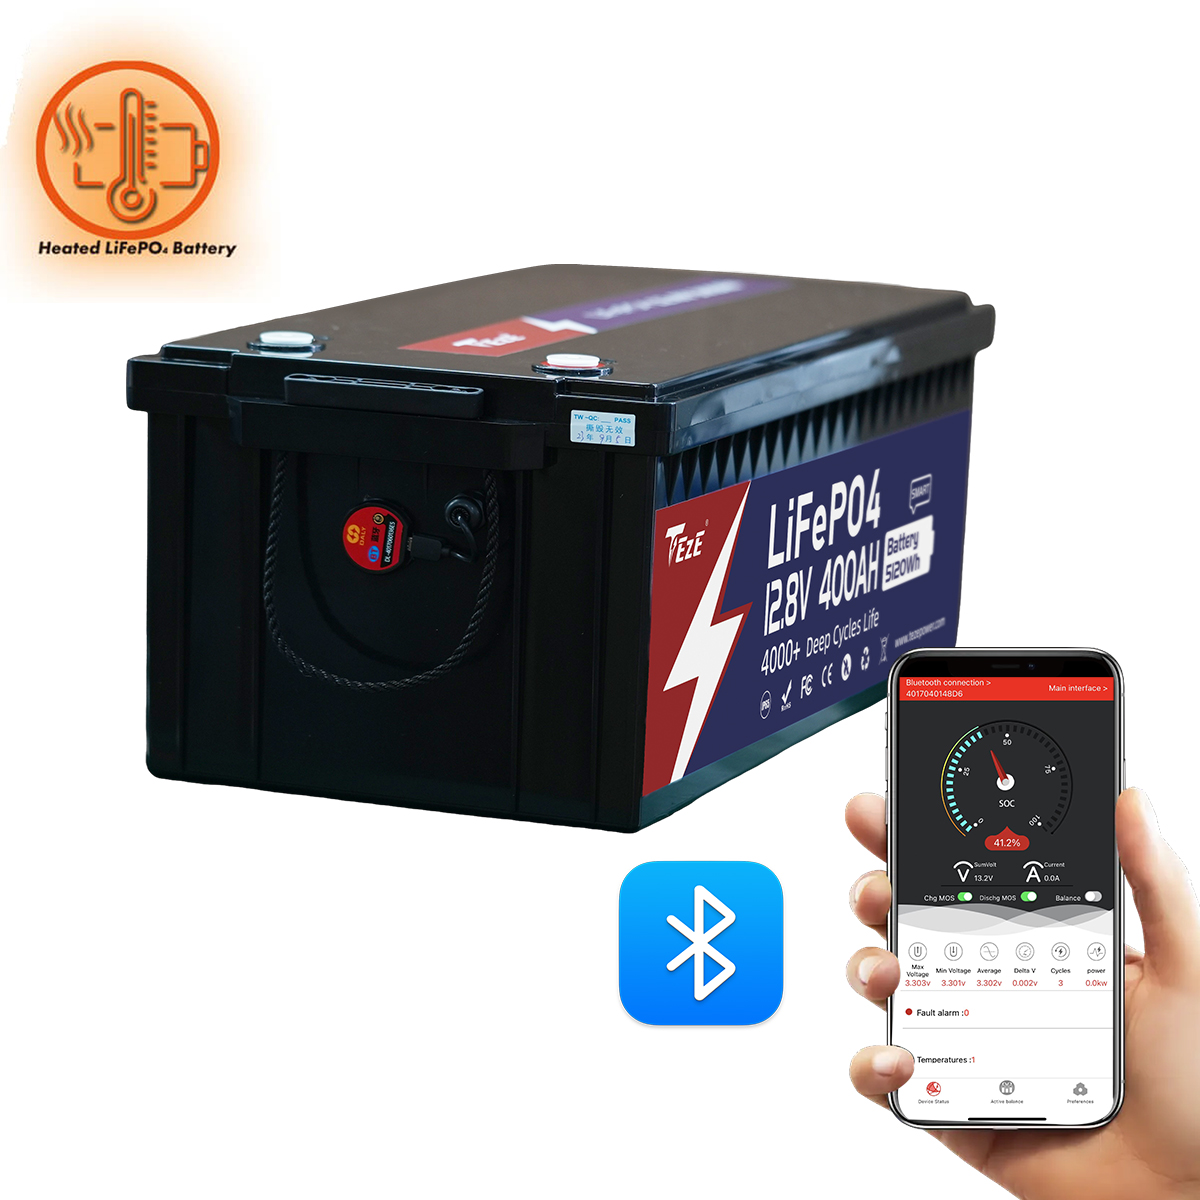 NEW-TezePower 12V400Ah LiFePO4 Battery with Bluetooth, Self-heating and Active Balancer, Built-in 250A Daly BMS (Bluetooth External Version)